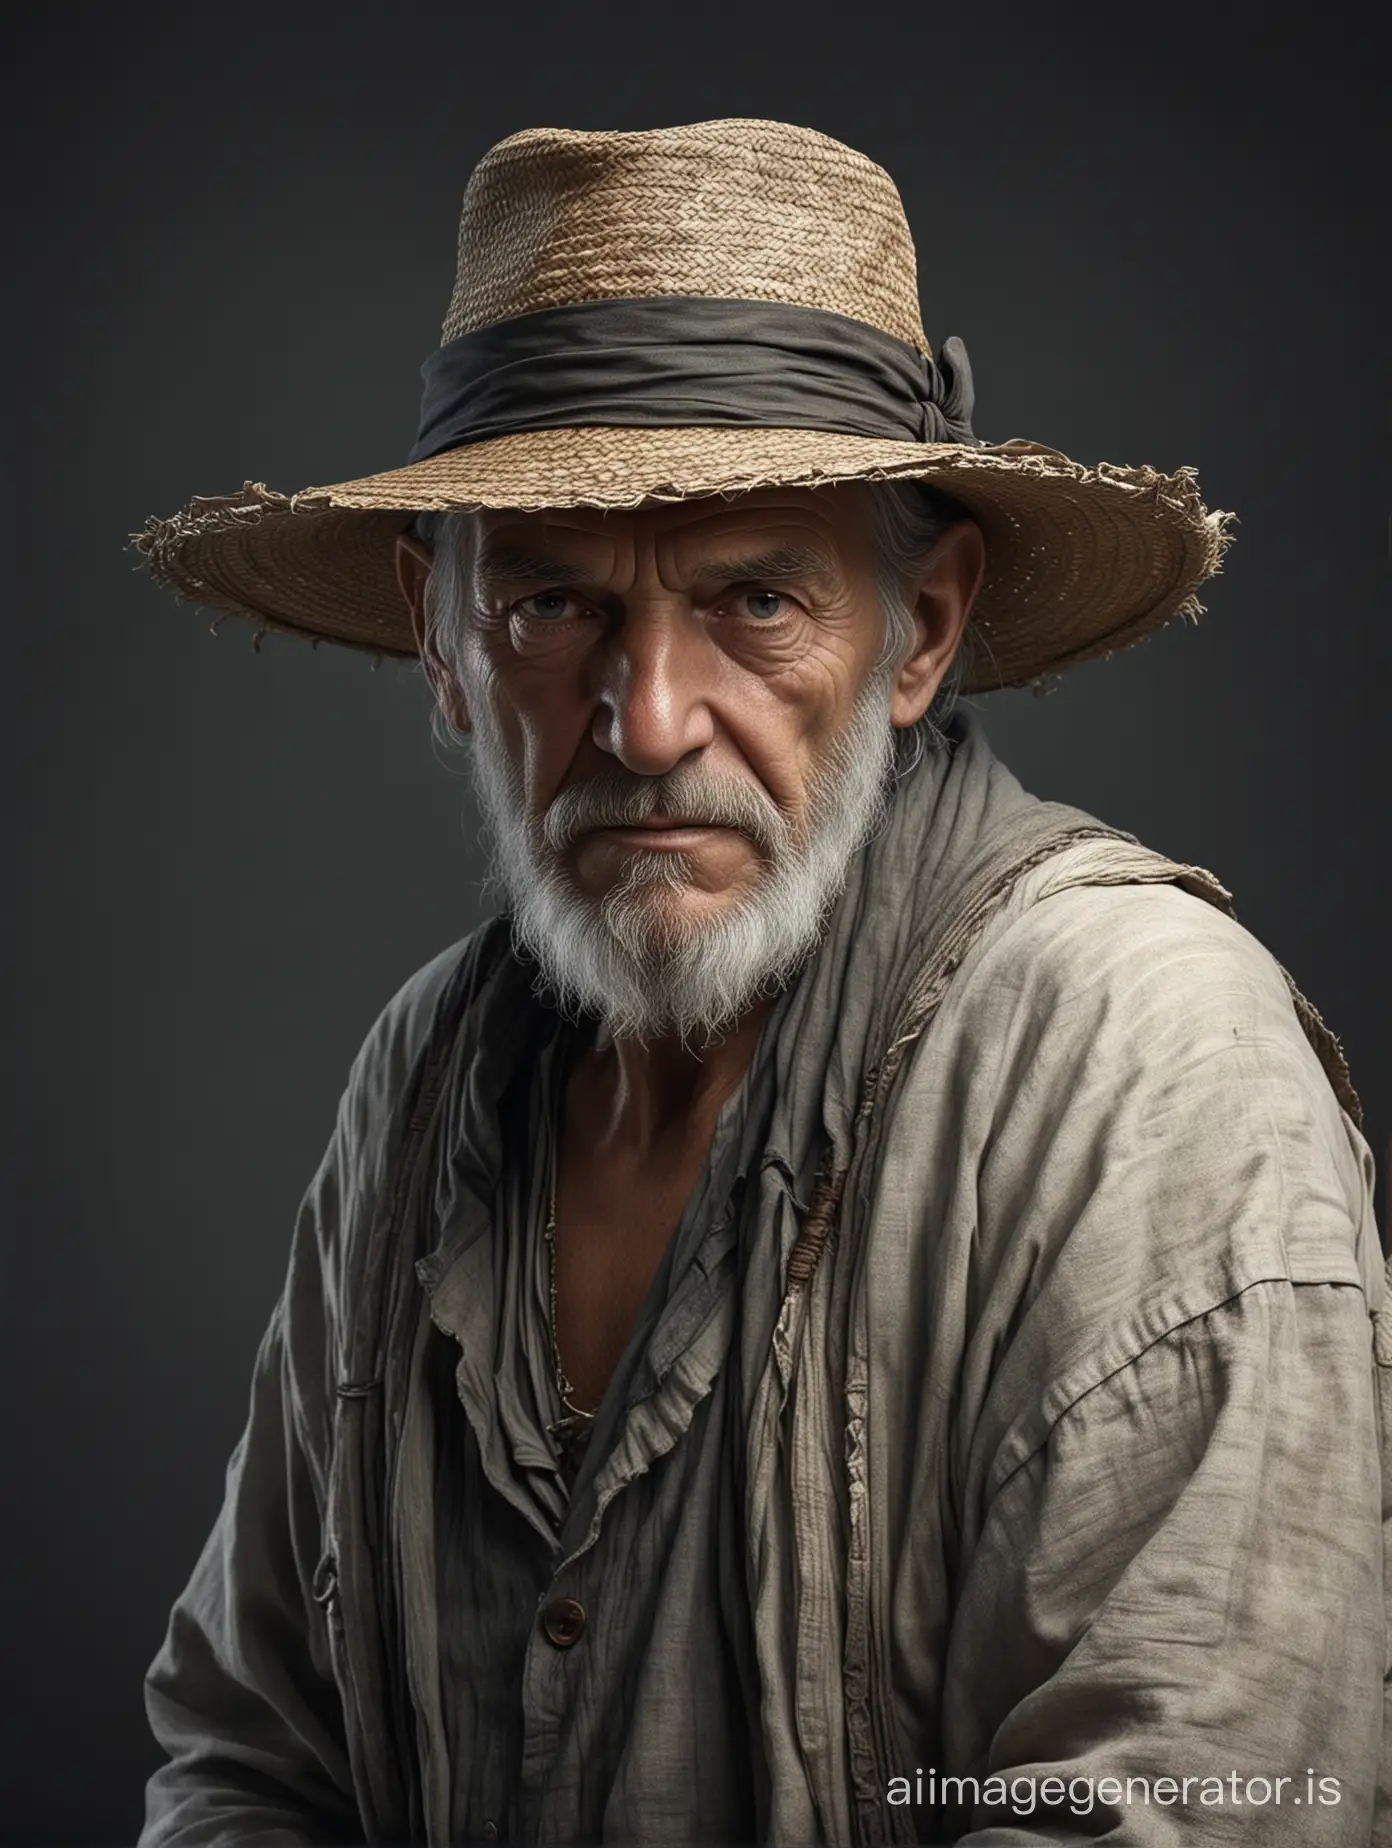 Mysterious-Old-Man-in-Gray-Tunic-and-Straw-Hat-Realistic-Portrait